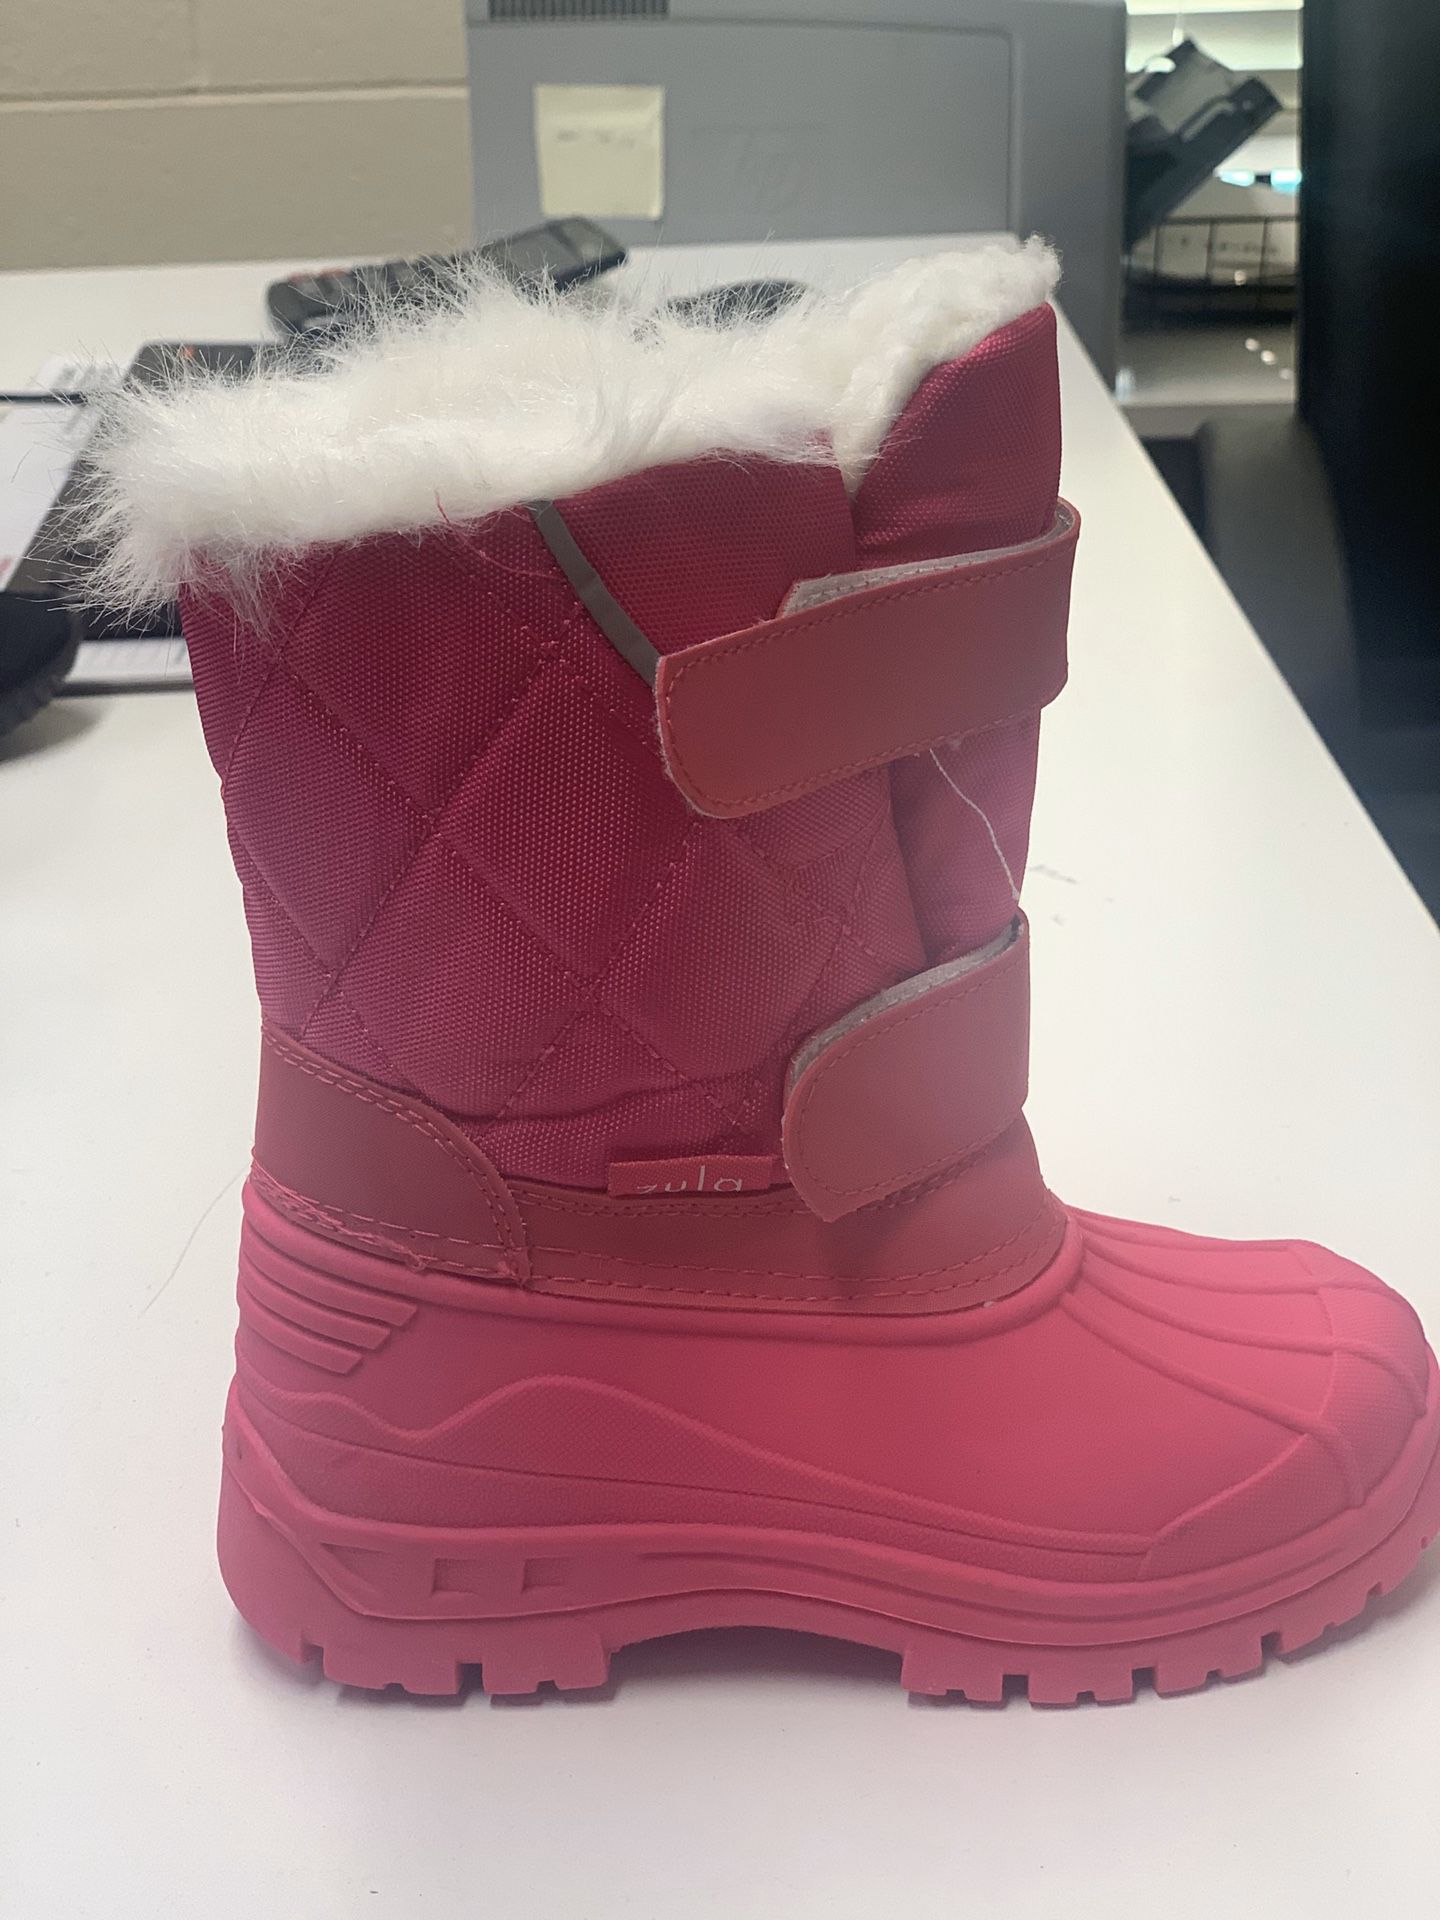 Snow boots for little girls size 7,8,9,10,11,12,13,1, kids